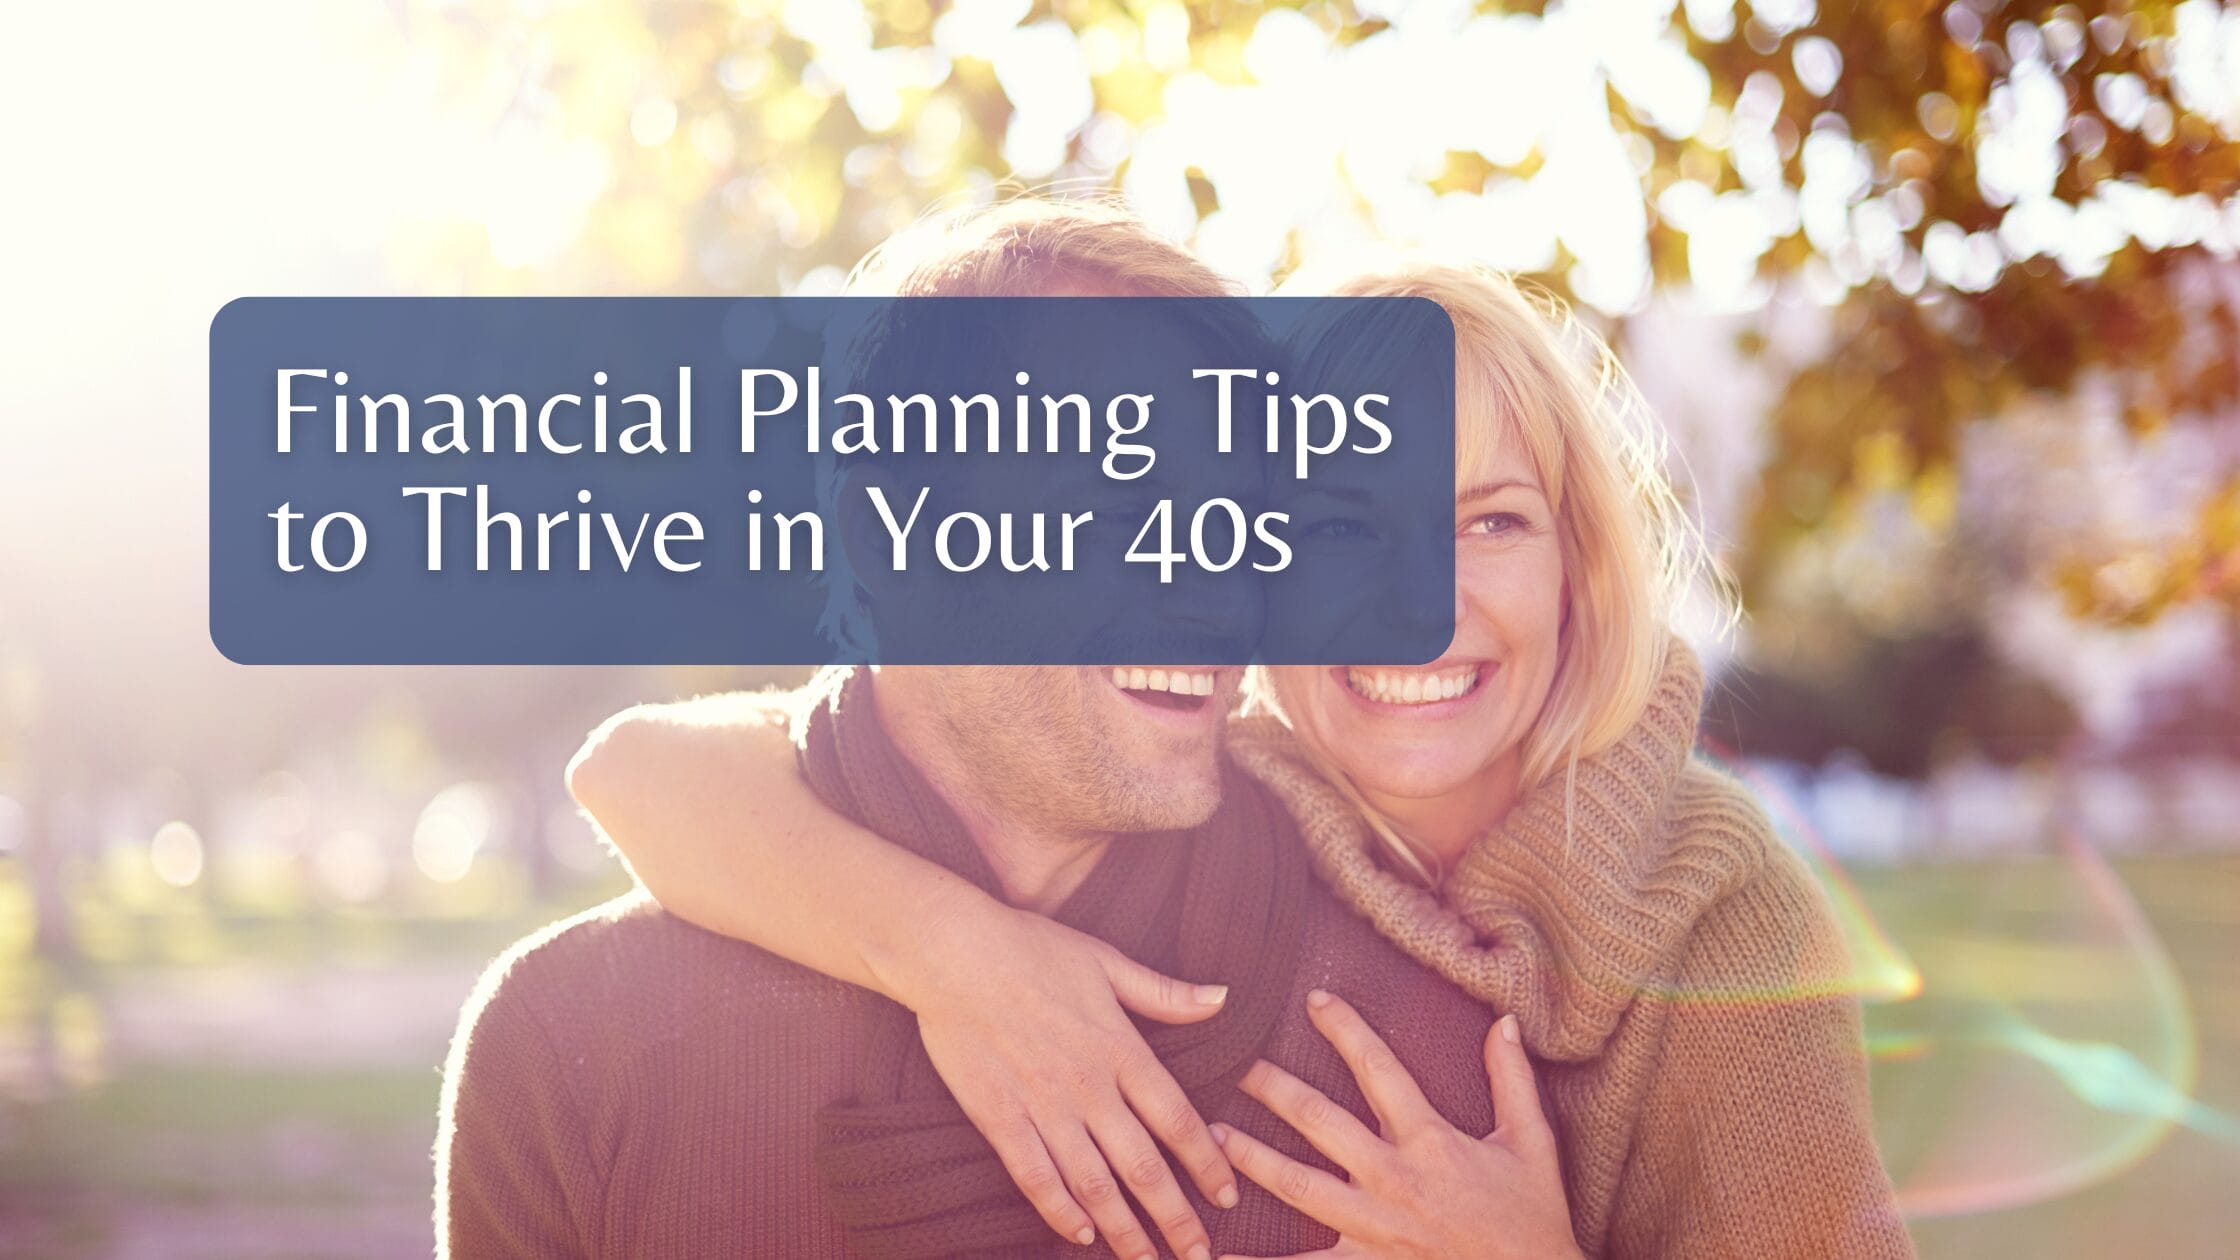 Financial Planning Tips to Thrive in Your 40s